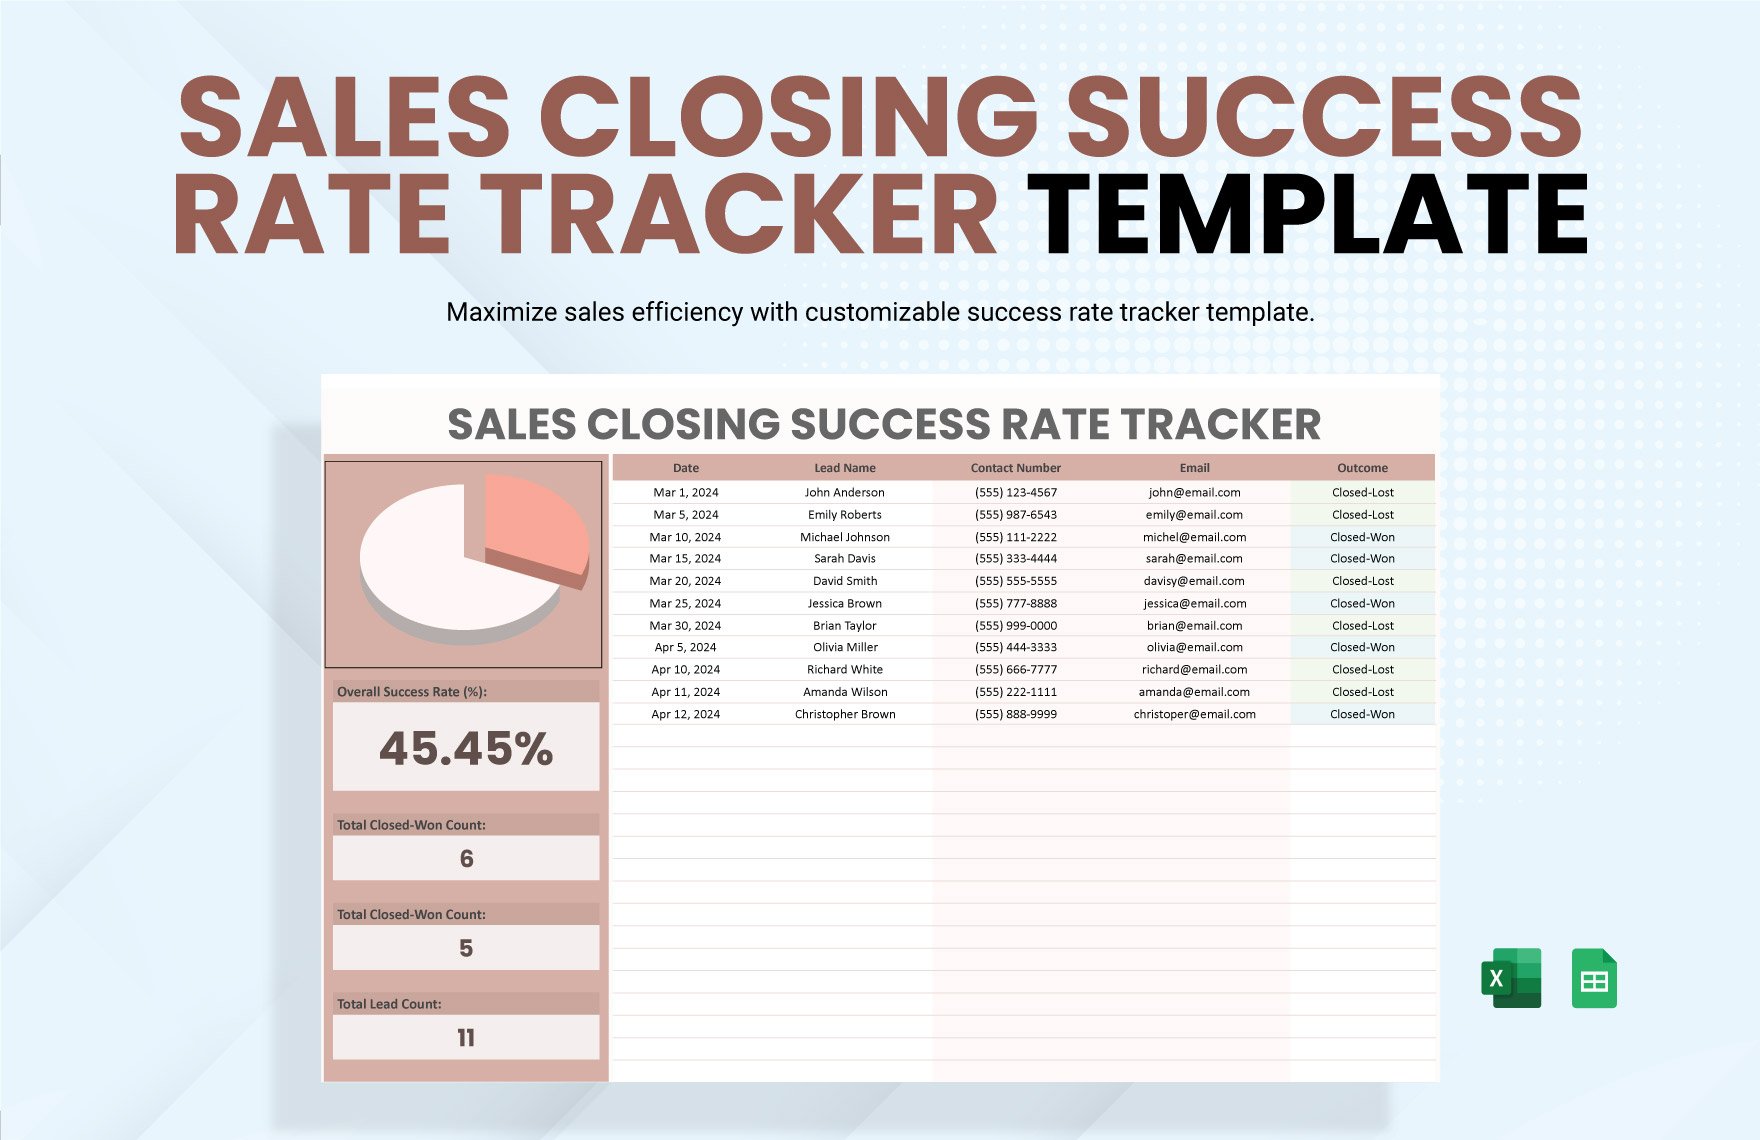 Sales Closing Success Rate Tracker Template